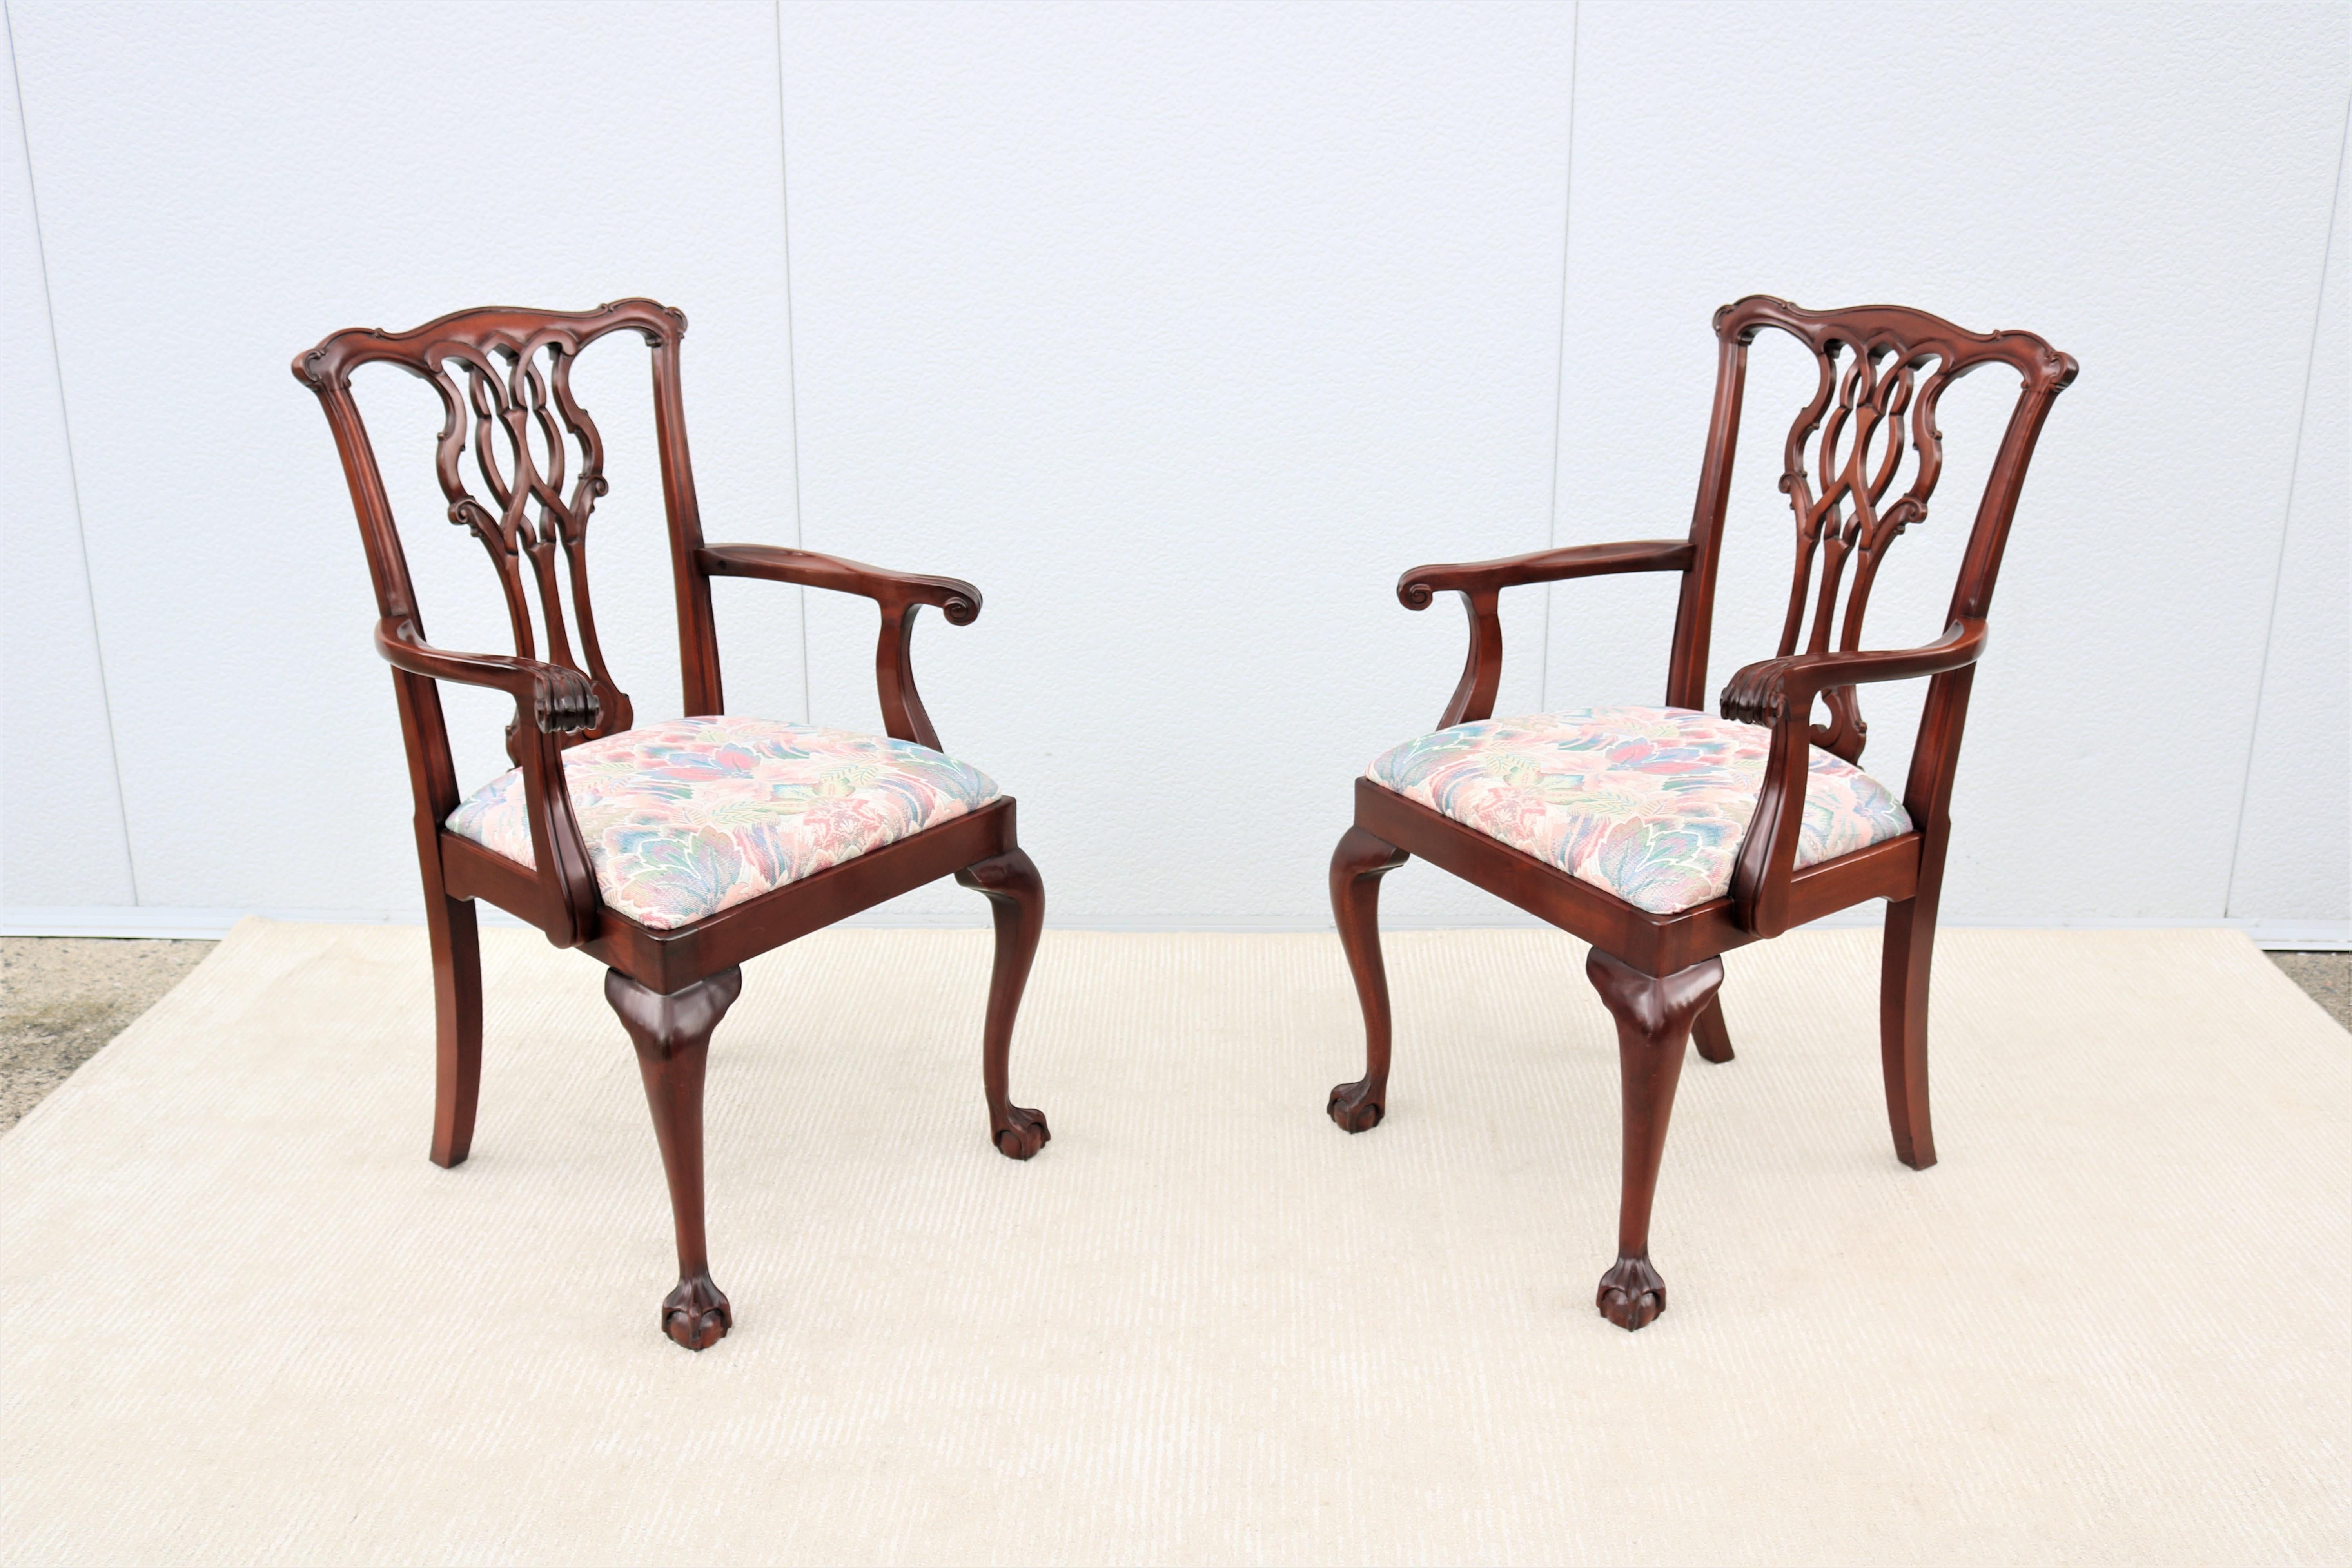 These fabulous traditional classic Chippendale style open armchairs are exceptionally crafted of hand-carved mahogany by skilled artisans using high-quality materials.
Features a shaped top rail above a hand carved and pierced back splat, the